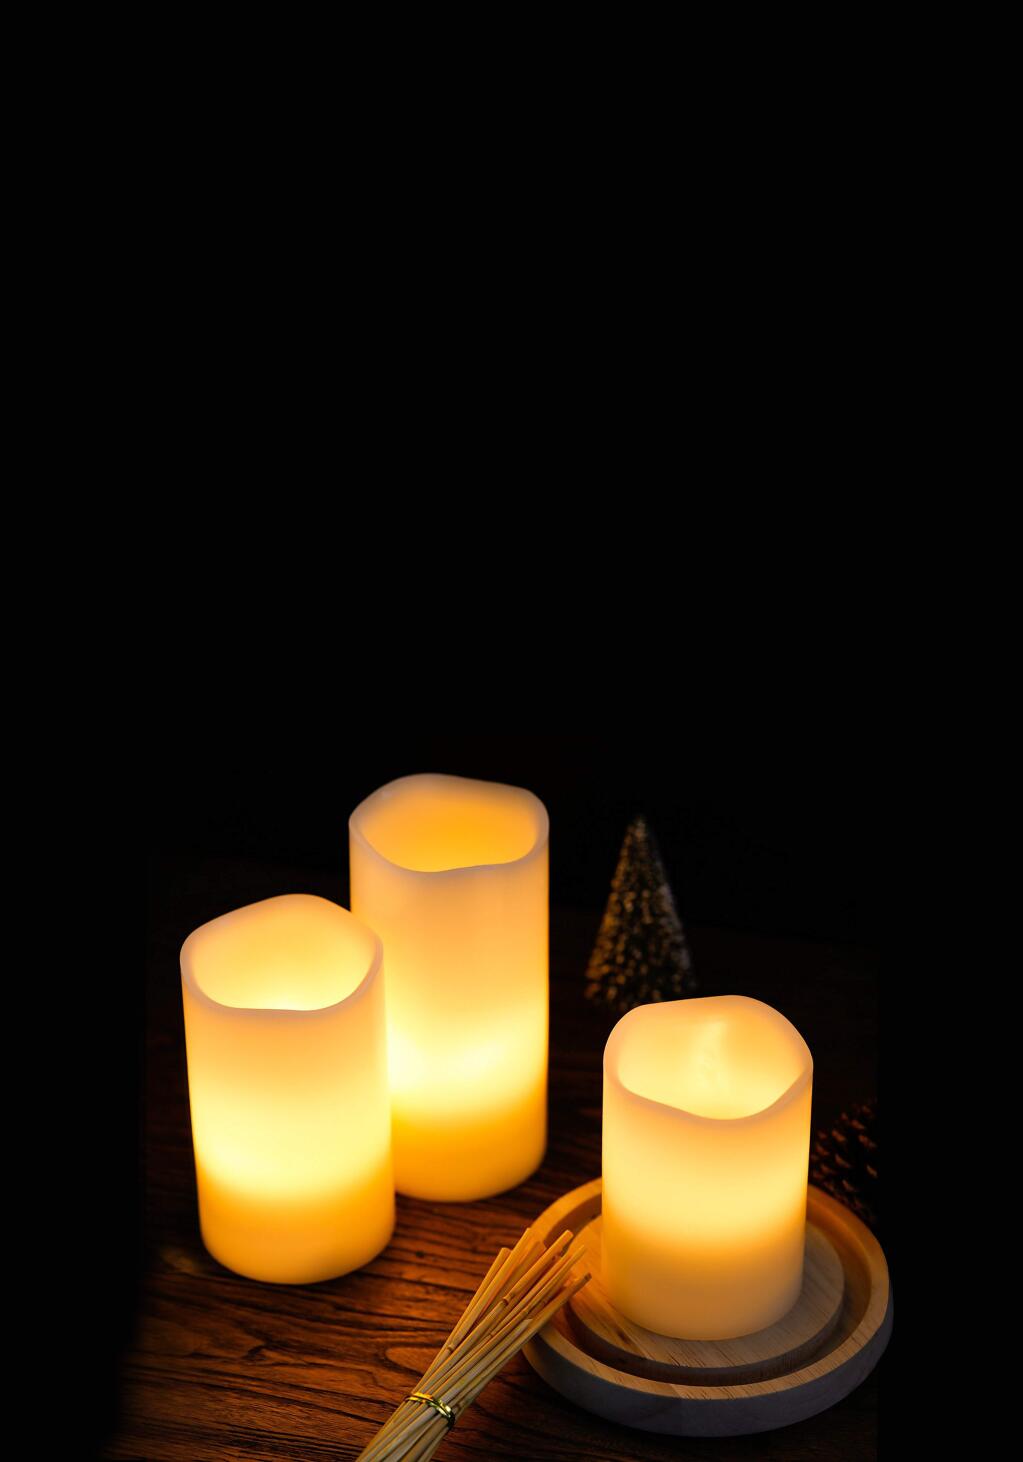 A LED flameless candle set: These real wax battery operated candles come in sets of 3 ($8) with real candle flickering affect. Candles should not be placed in direct sunlight, especially on hot days. (cedarandpineevents.com)